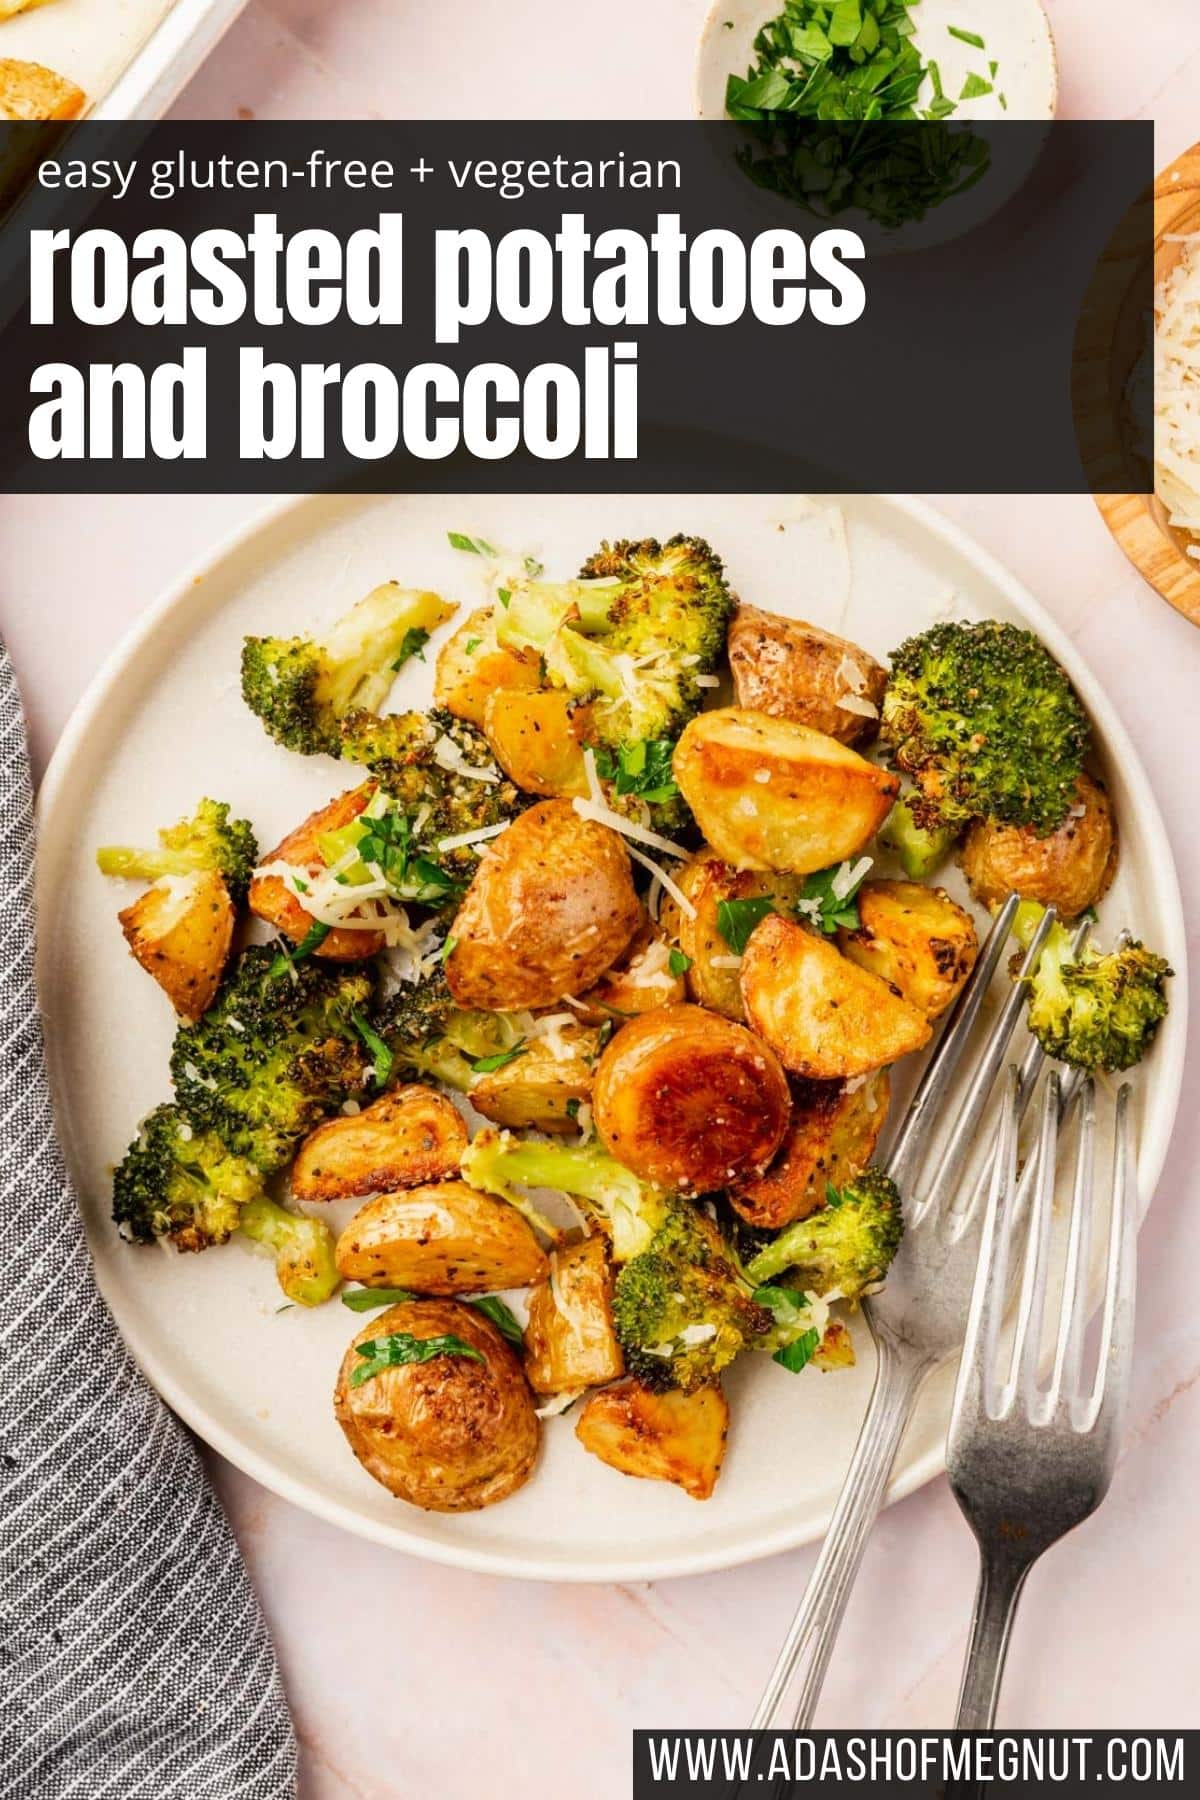 A plate of roasted broccoli and potatoes with parmesan cheese with two forks with a text overlay over the image.